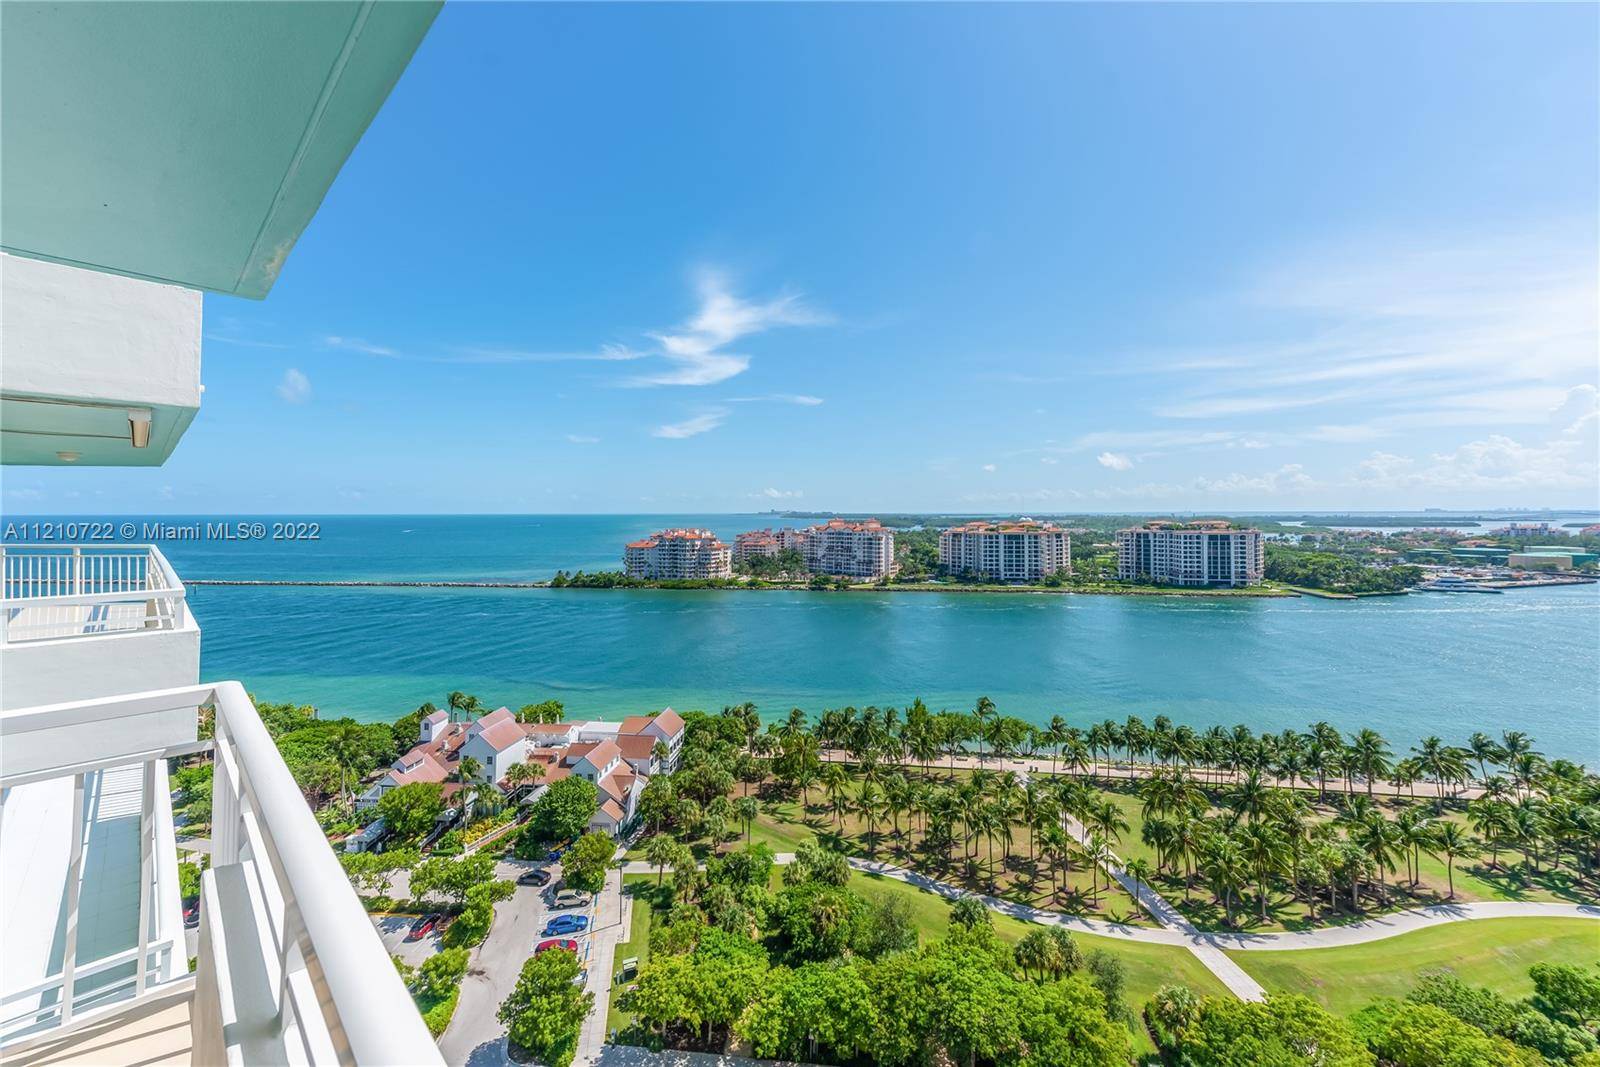 Unit 2001 at South Pointe Tower is a 2 bedroom 2 bathroom condo with spectacular views of the Ocean, the Miami skyline and Govt Cut.